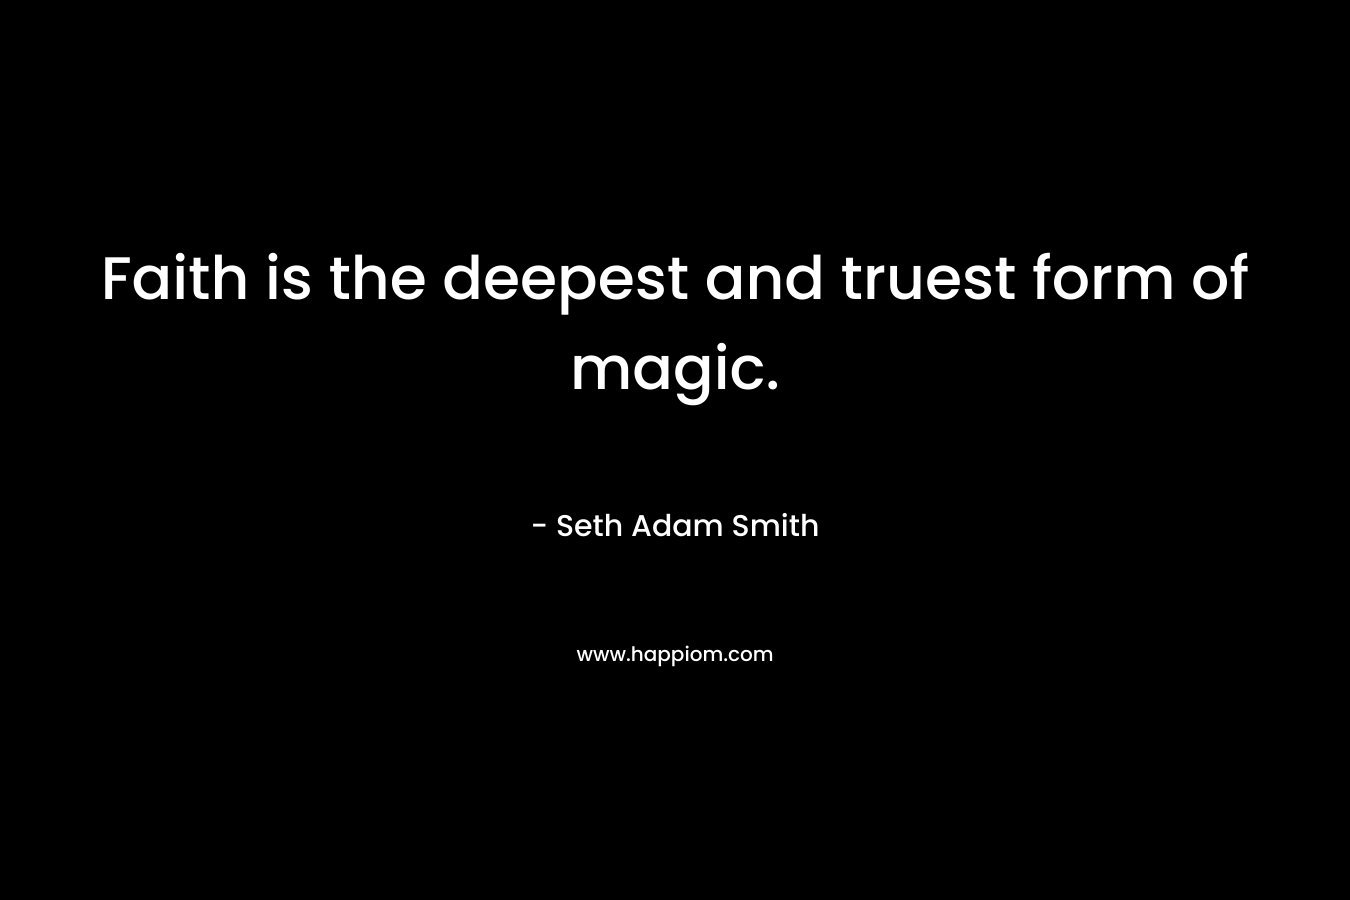 Faith is the deepest and truest form of magic.